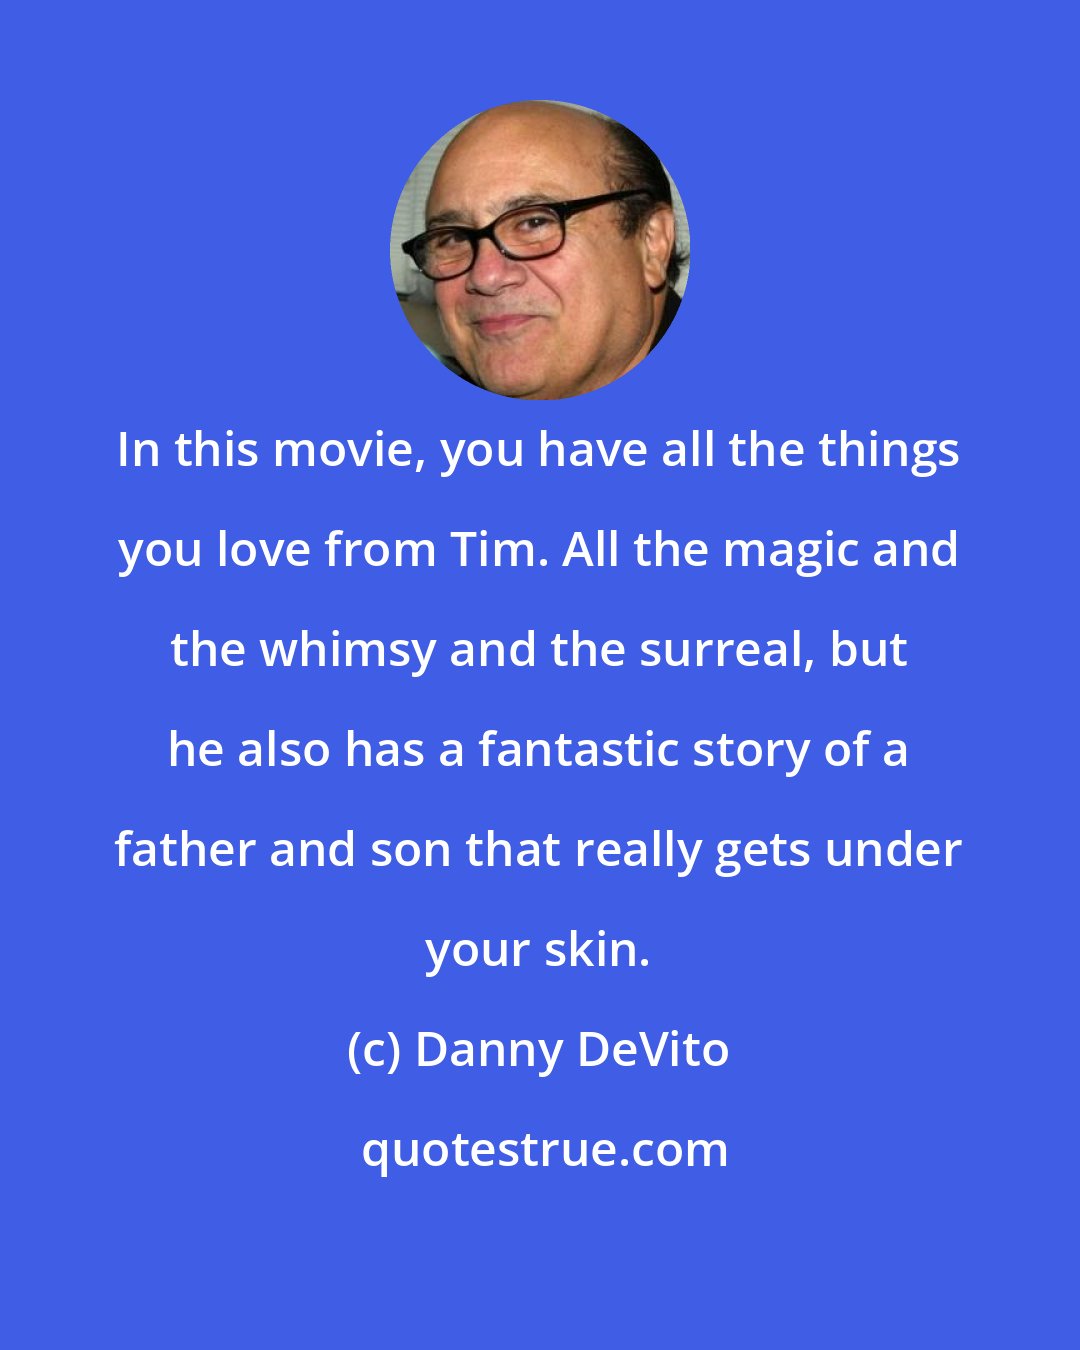 Danny DeVito: In this movie, you have all the things you love from Tim. All the magic and the whimsy and the surreal, but he also has a fantastic story of a father and son that really gets under your skin.